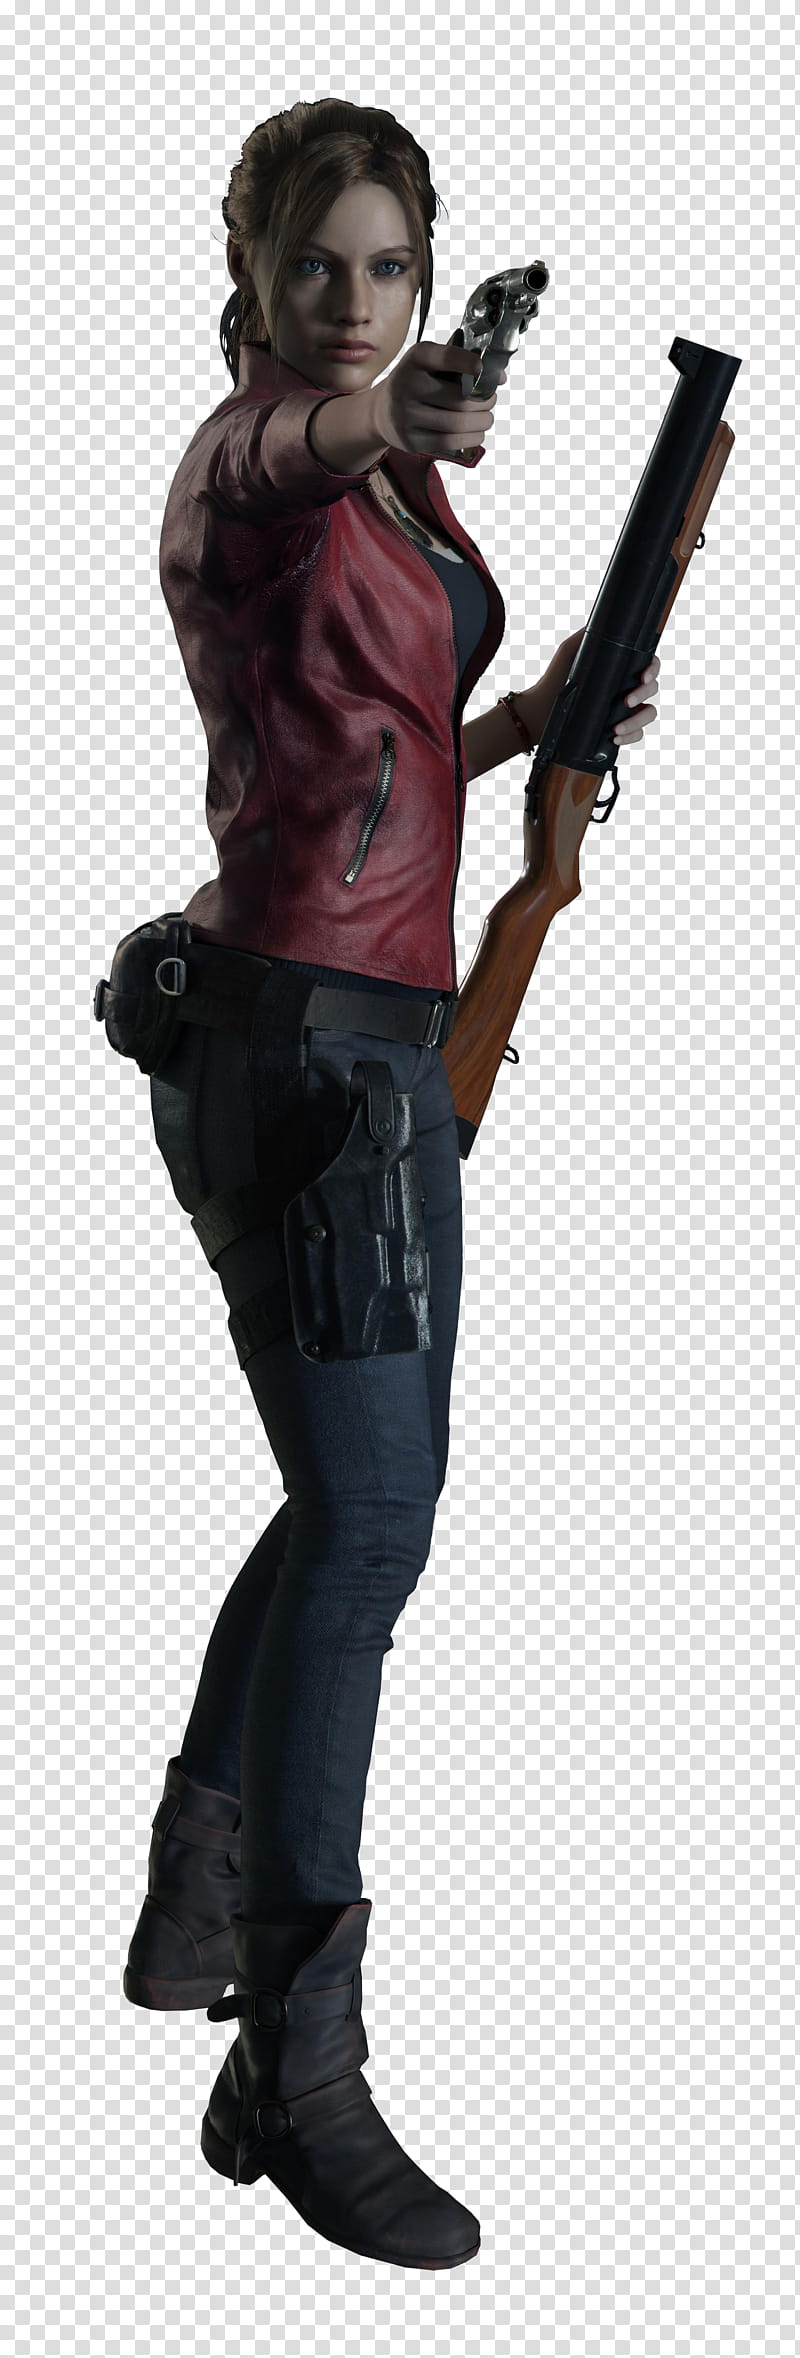 Resident Evil   Claire Redfield, woman holding pistol illustration transparent background PNG clipart